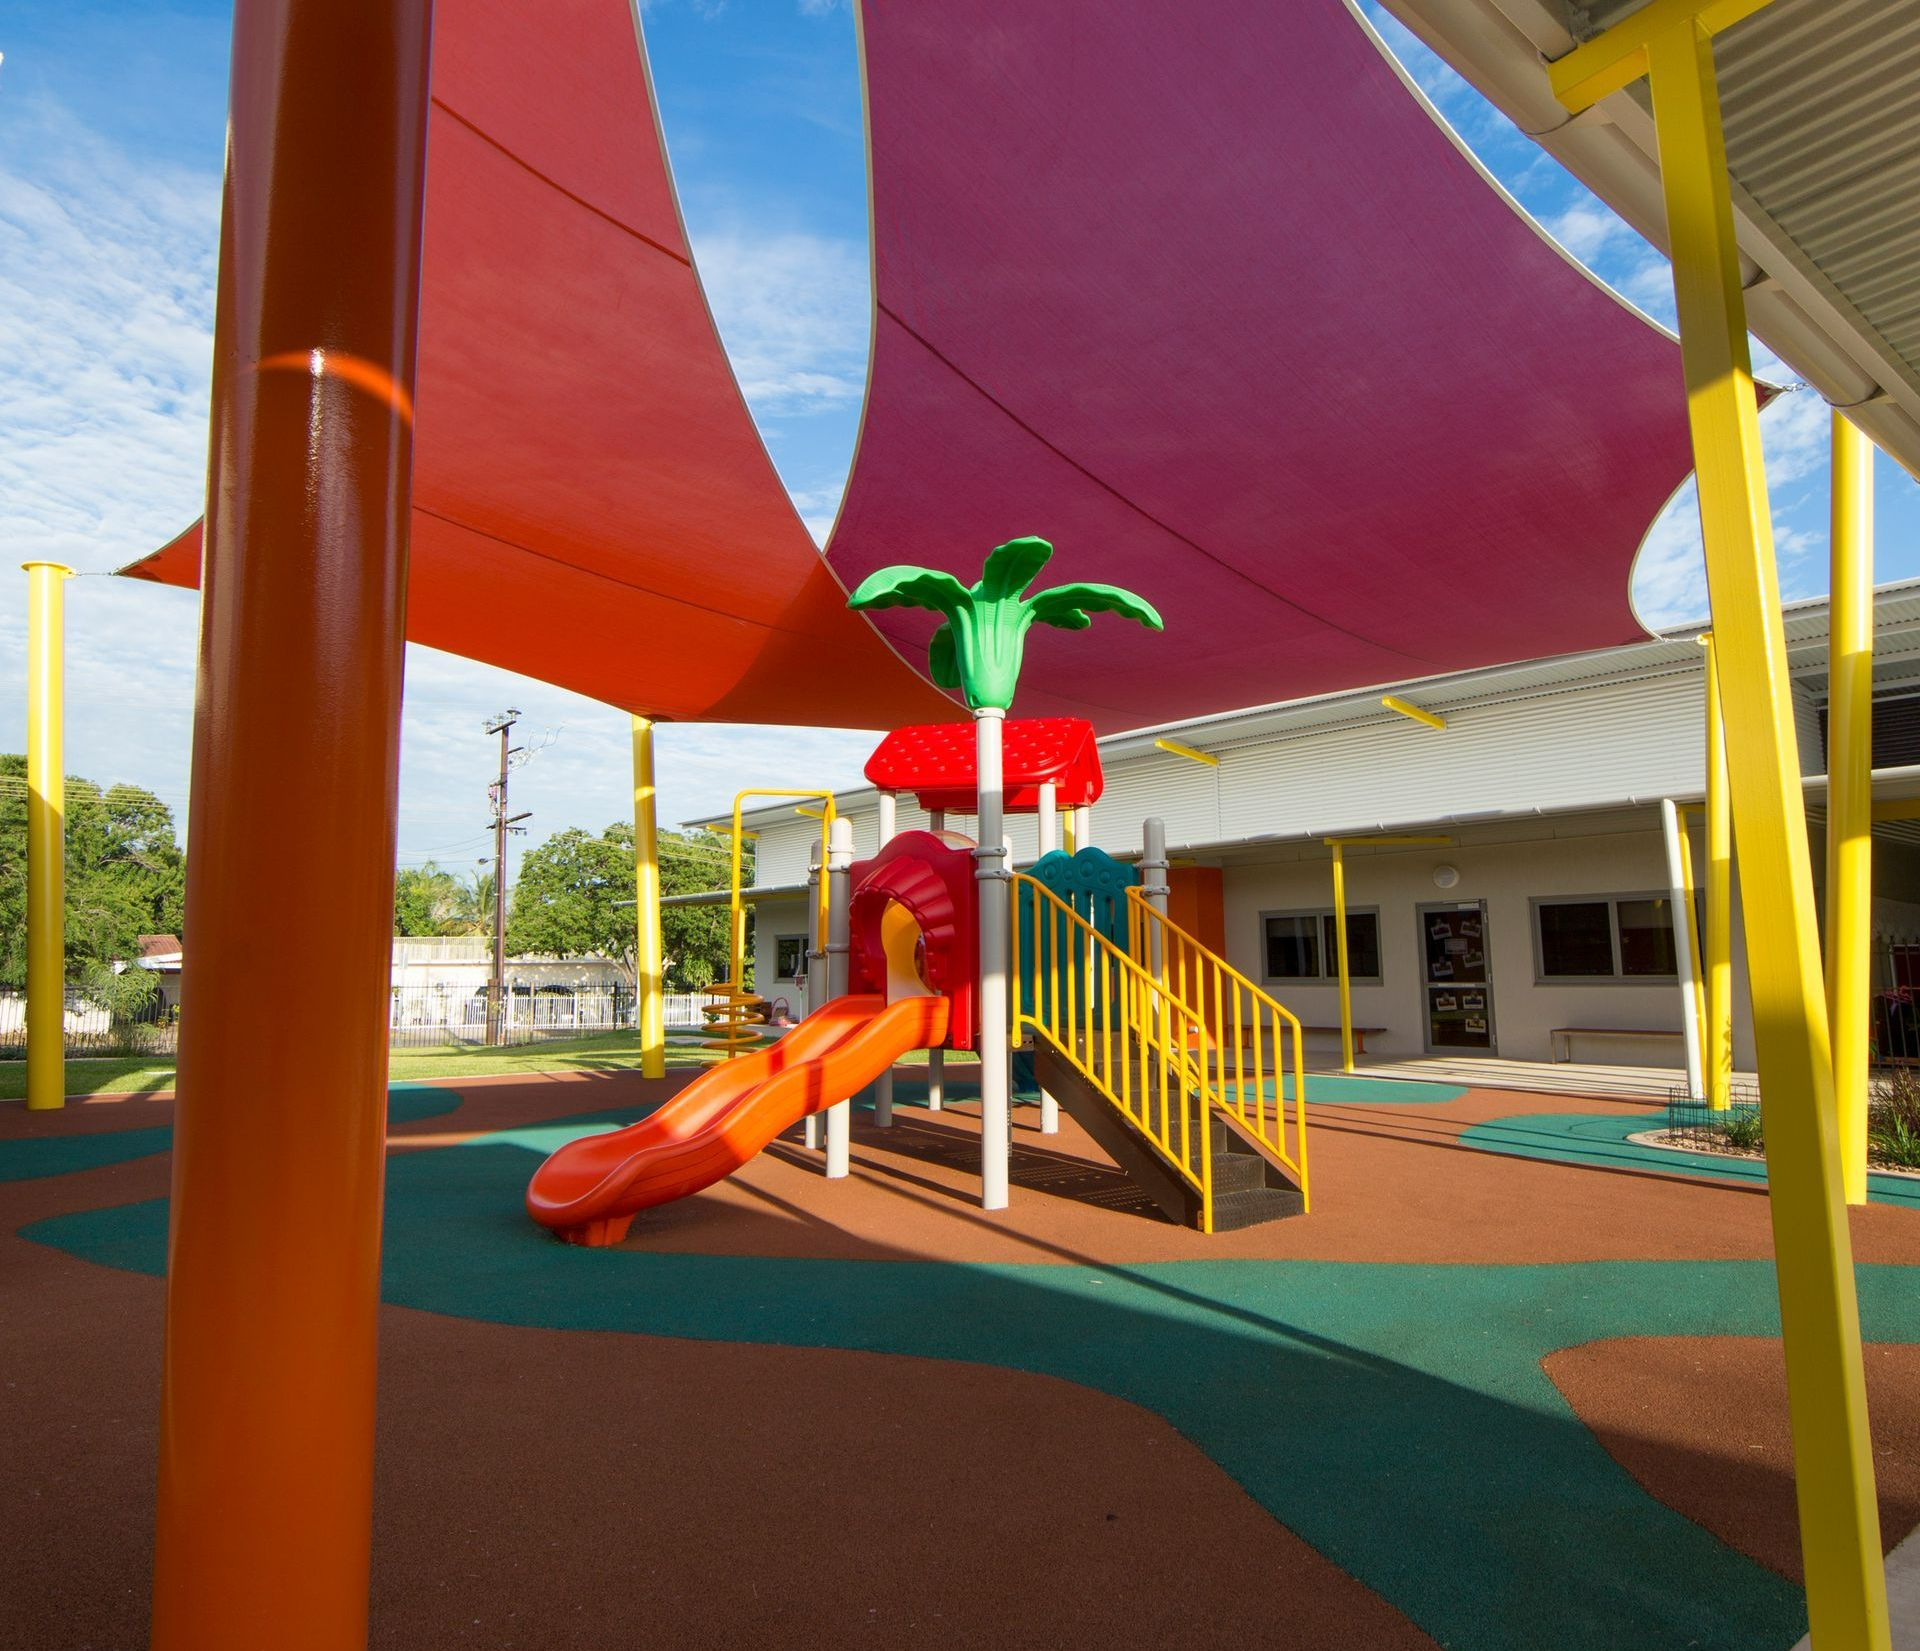 A playground with a slide and stairs under a purple umbrella